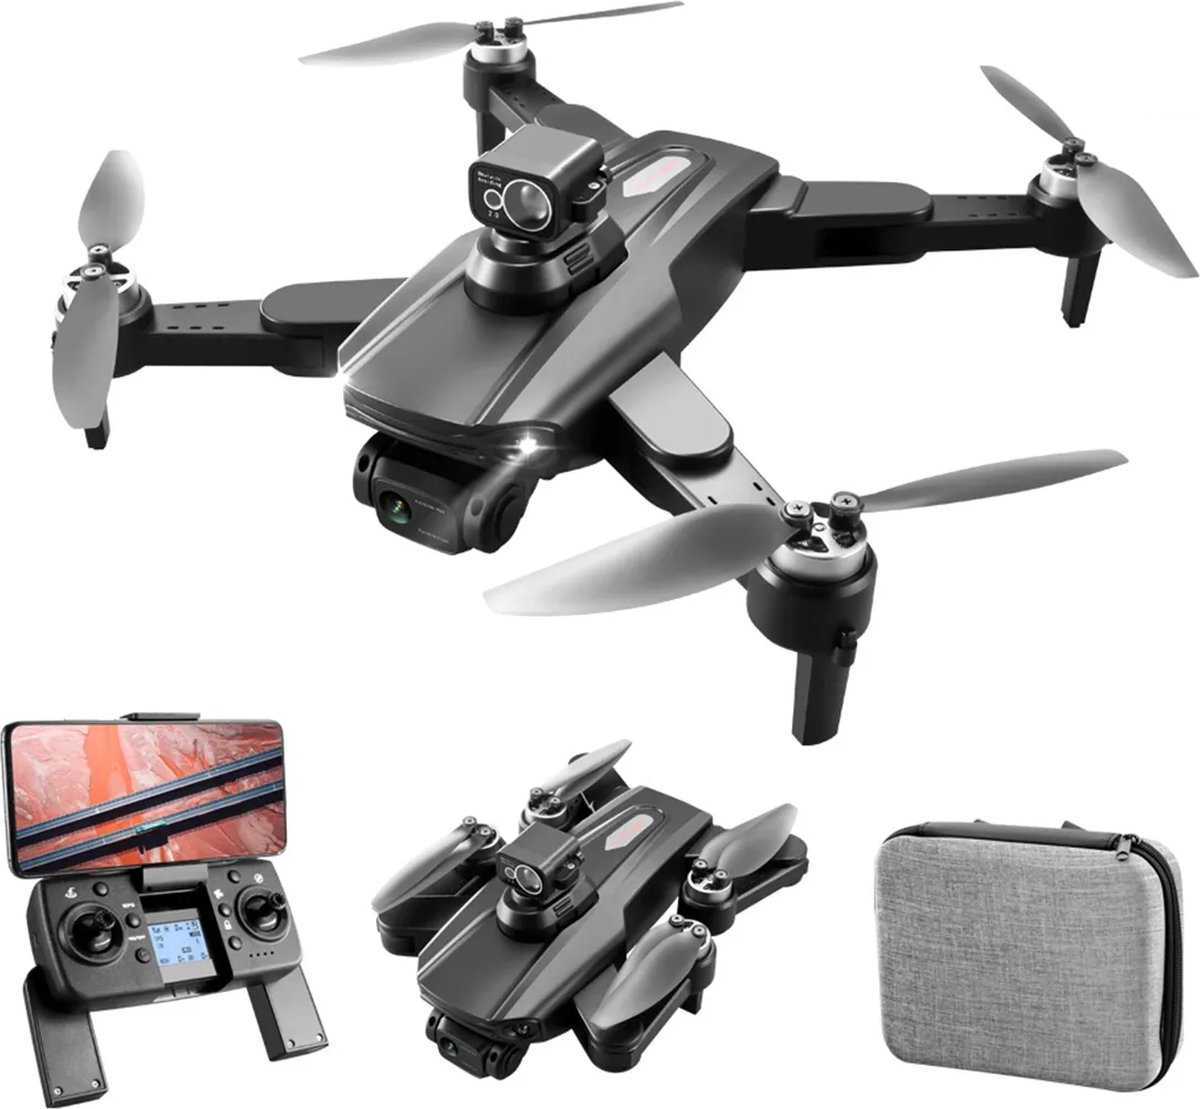 LUXWALLET AeroTech Ultra - 5Ghz WiFI GPS Drone – Laser Obstacle Avoidance - 1200M Afstand - RTH Functie - 15-30KM/h – Drone Met Mobiele App - 2 Accu + Opbergcase